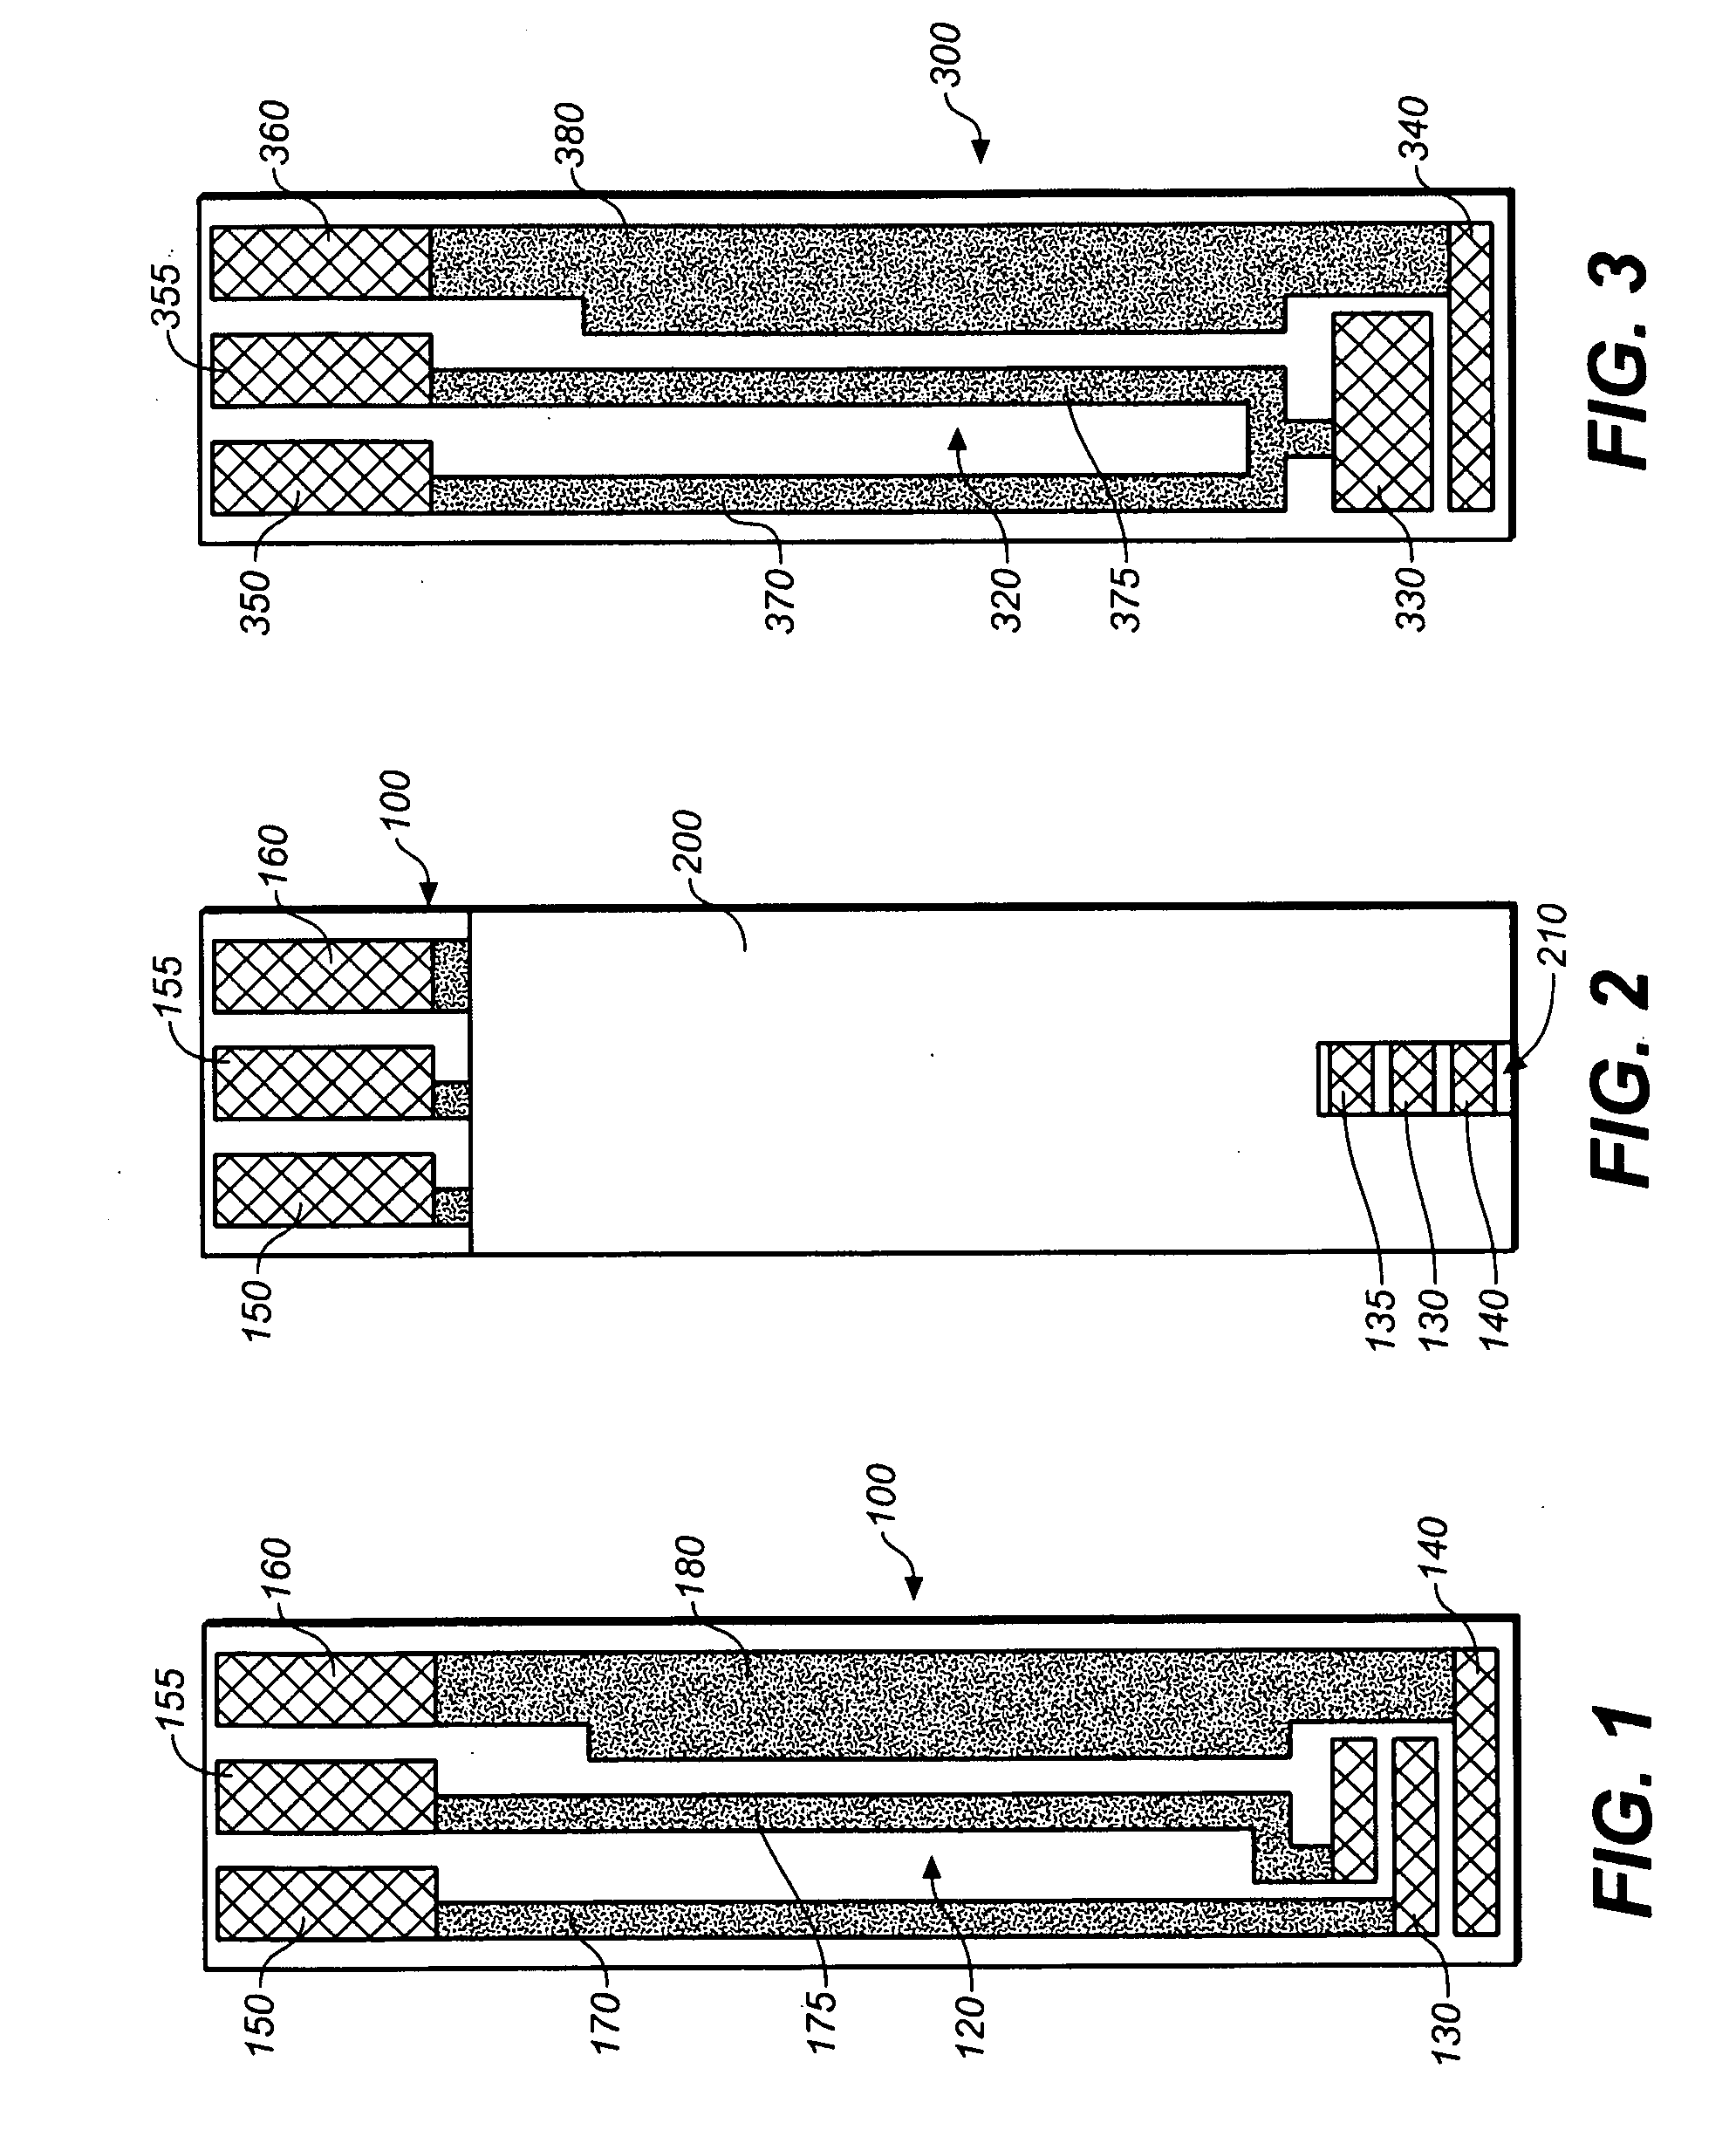 System for electrochemically measuring an analyte in a sample material